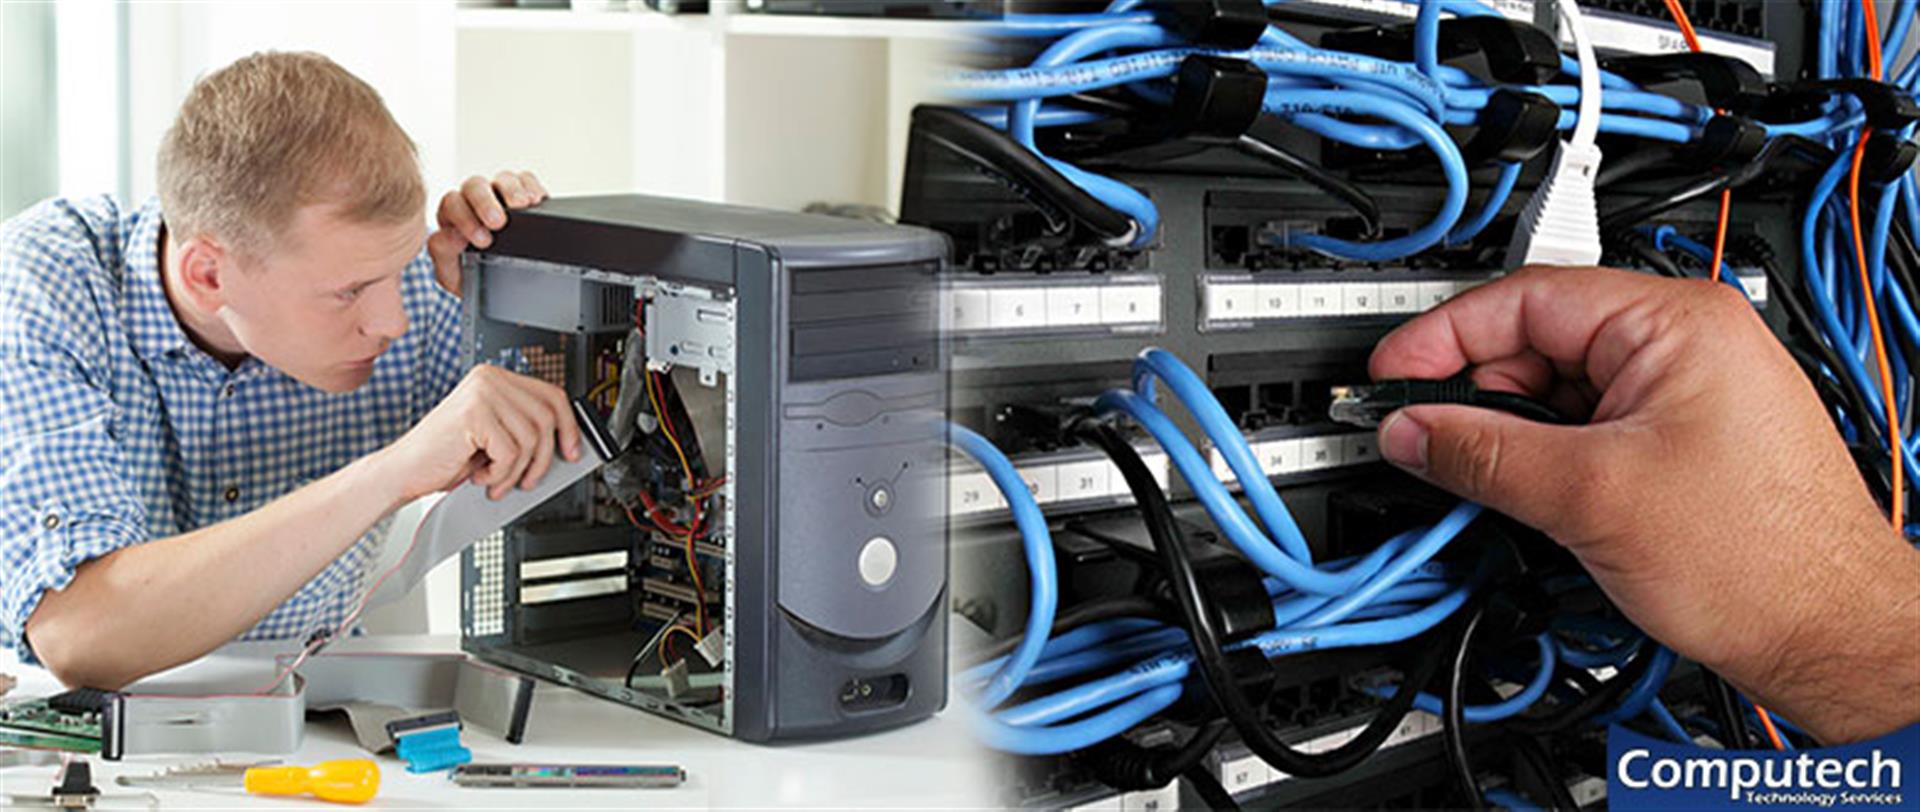 Brownsville Tennessee Onsite Computer & Printer Repair, Networking, Voice & Data Cabling Services